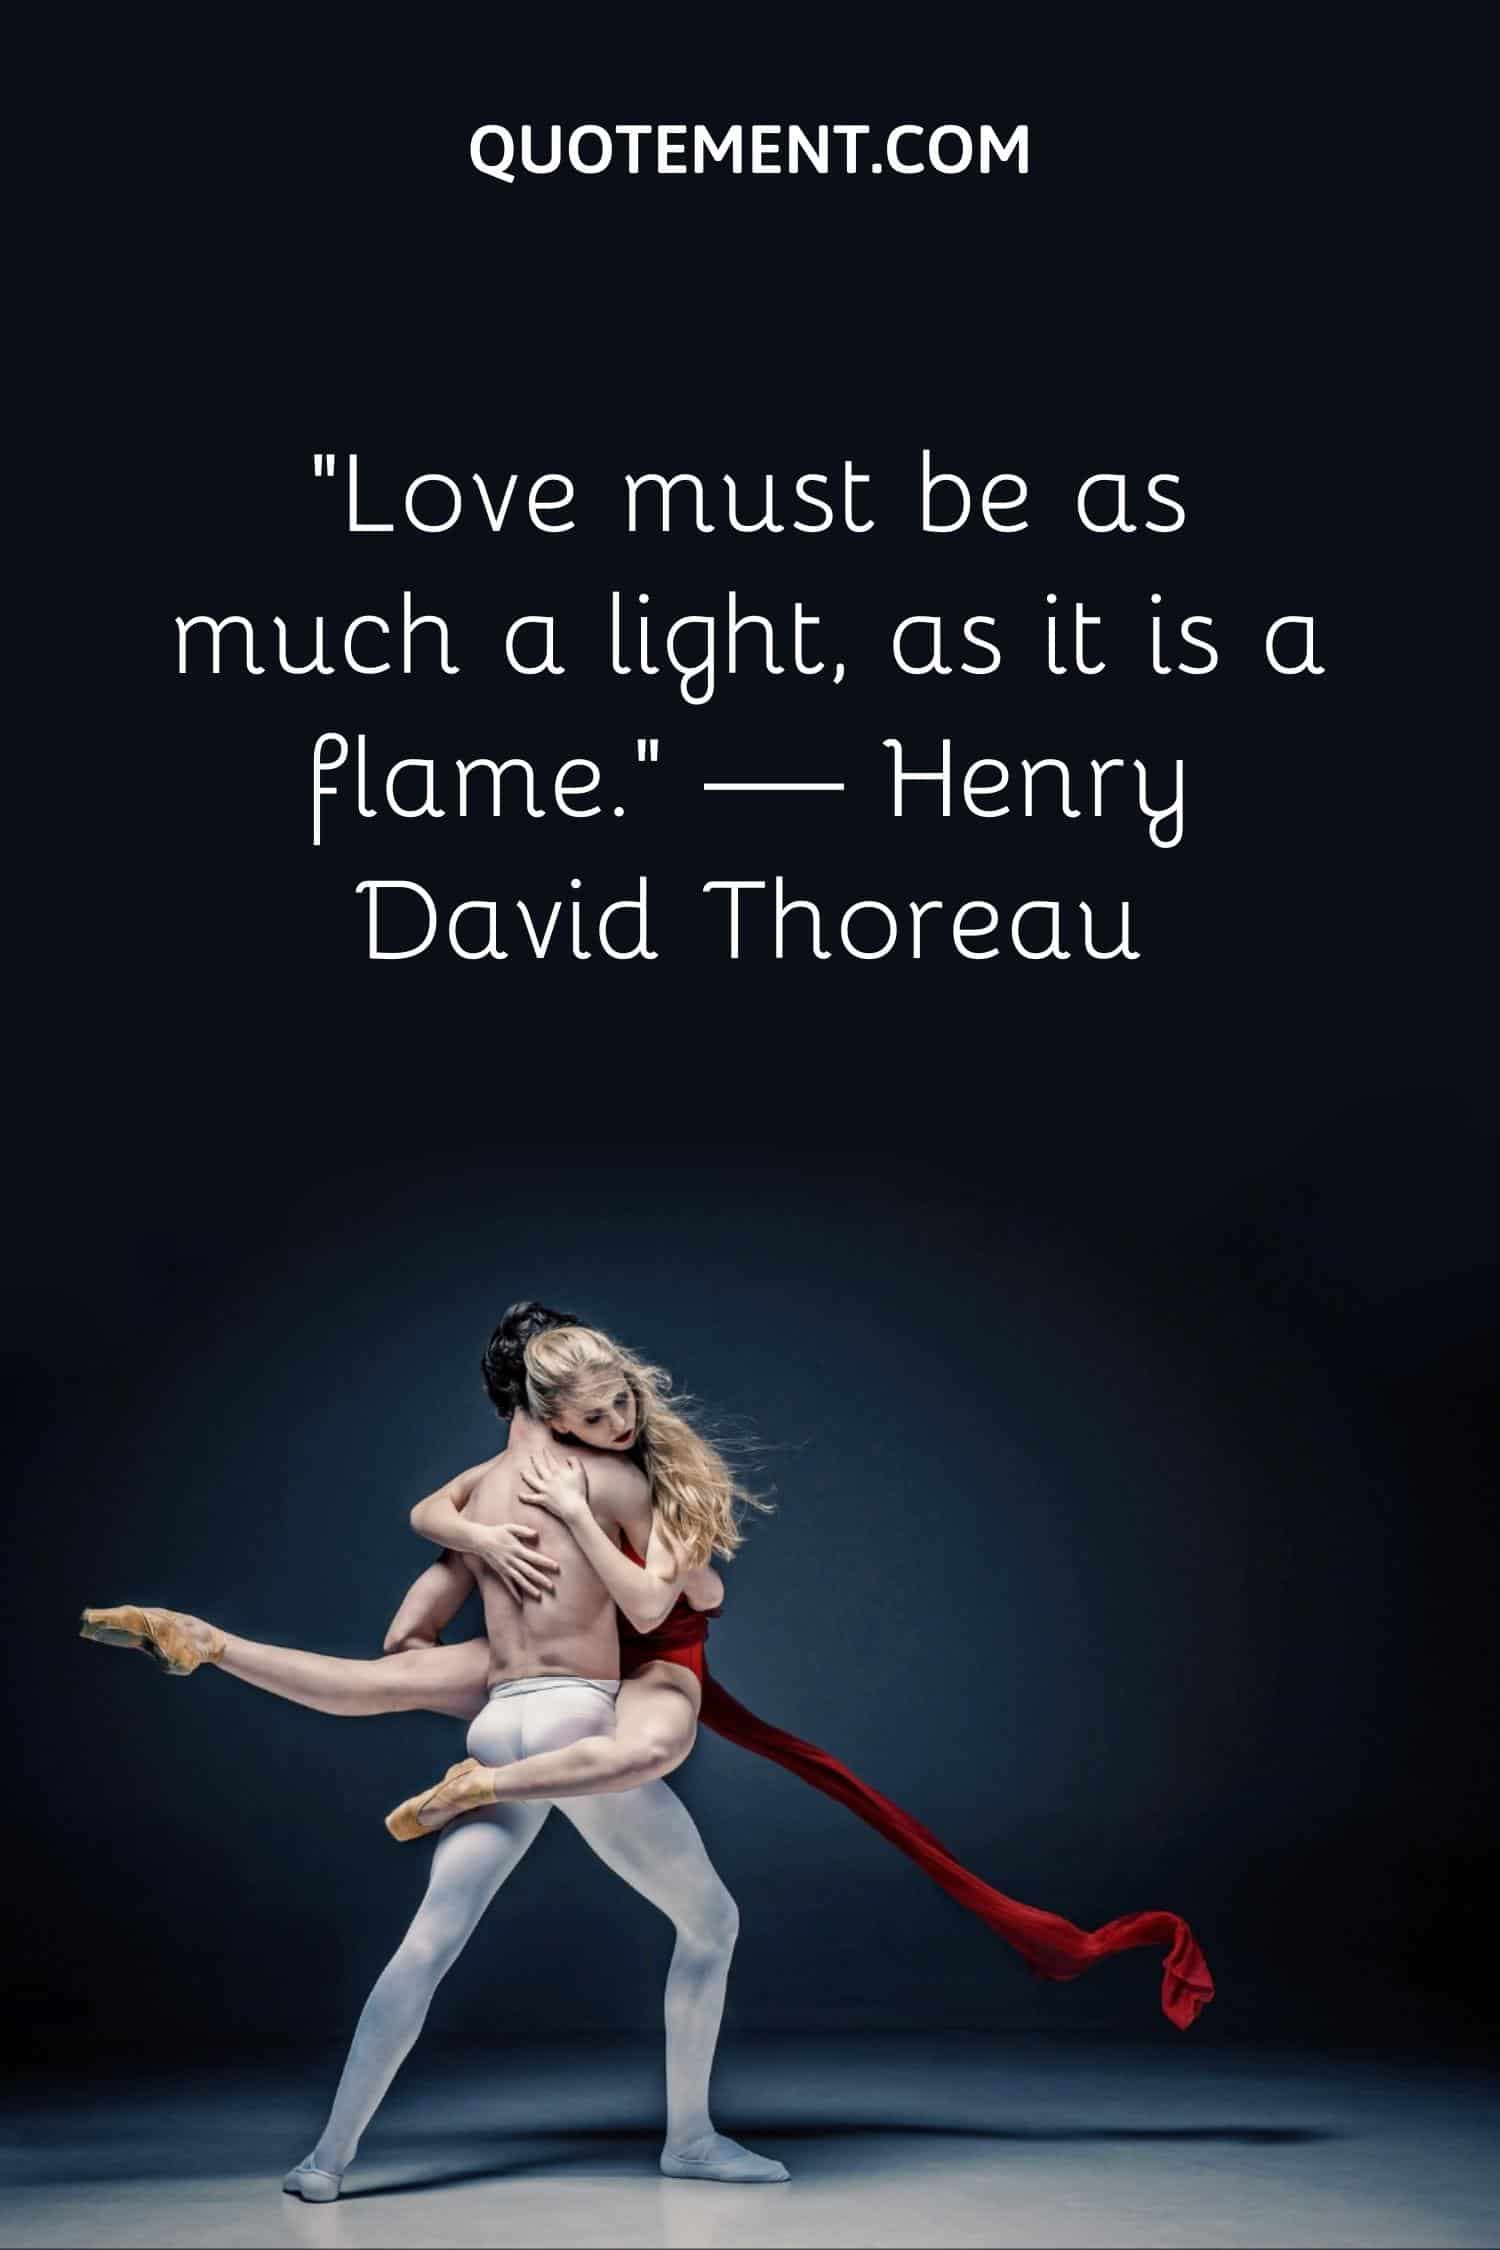 Love must be as much a light, as it is a flame